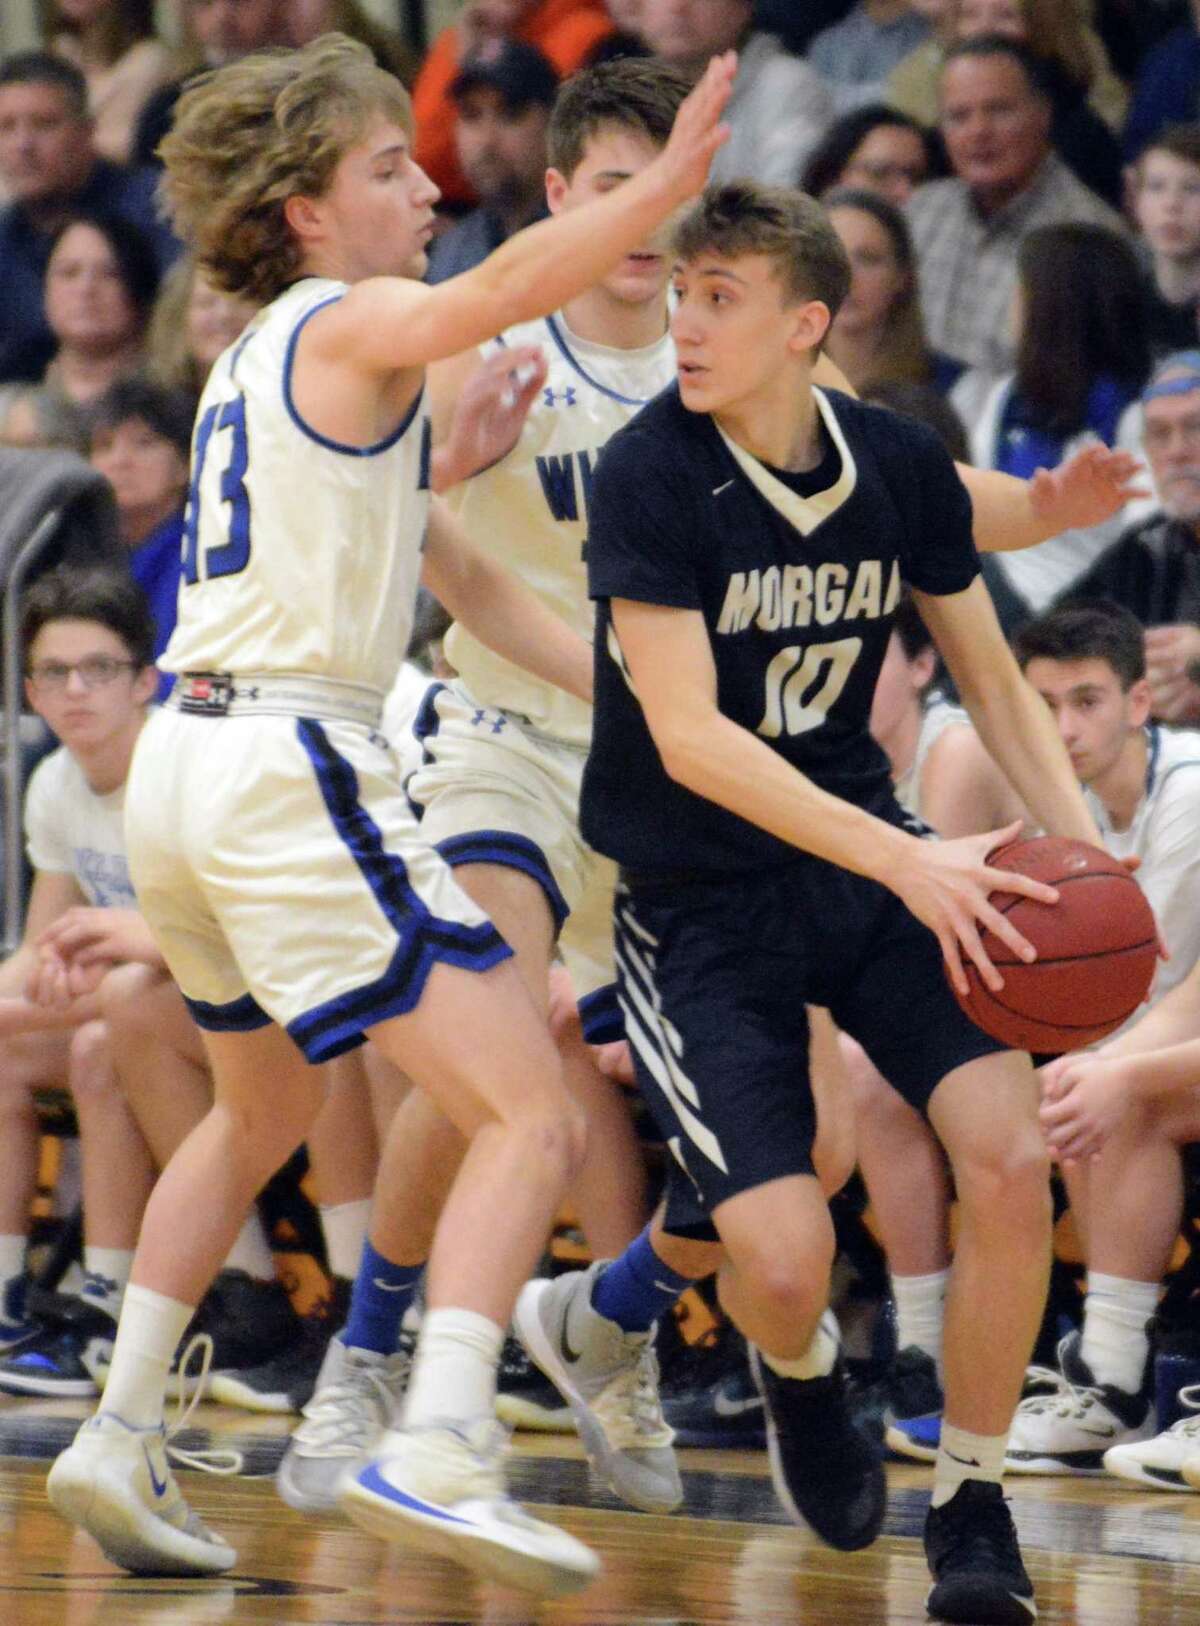 Morgan's Zach Johnson is defended by Old Lyme's Brady Sheffield.